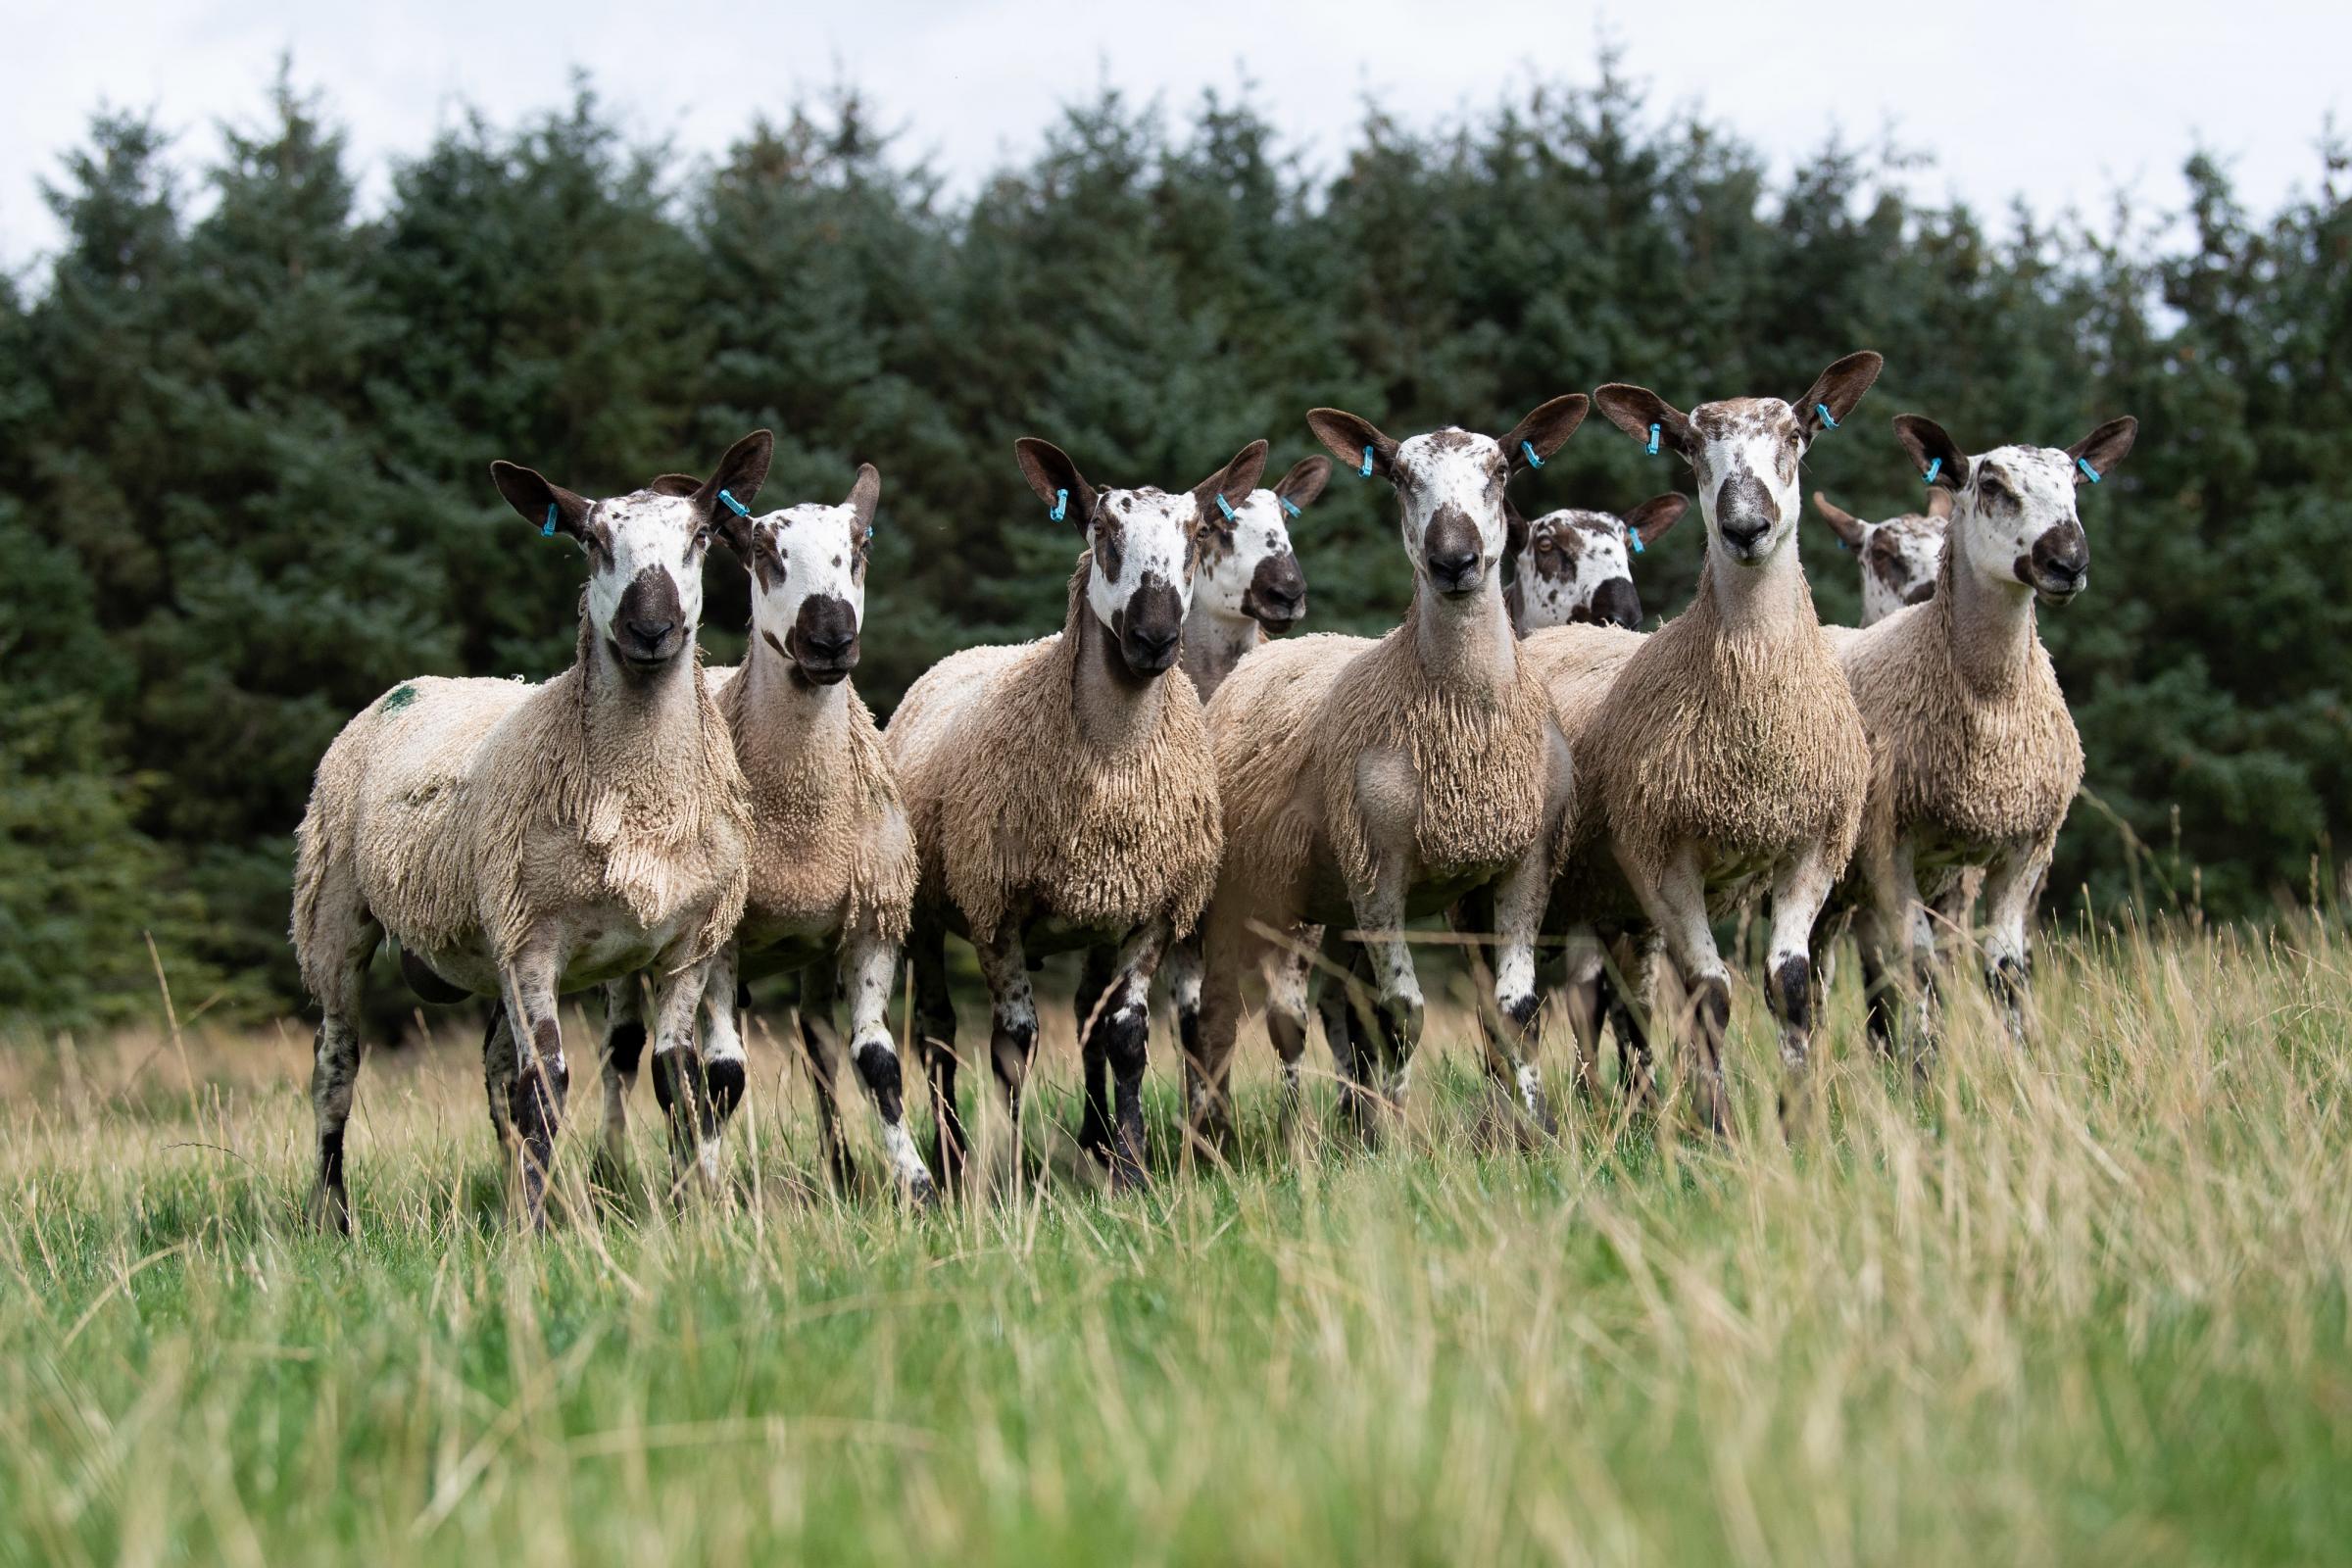 This years Blue Faced Leicester tup lambs that will be used on the flock and sold next year as shearlings Ref:RH190821050 Rob Haining / The Scottish Farmer...